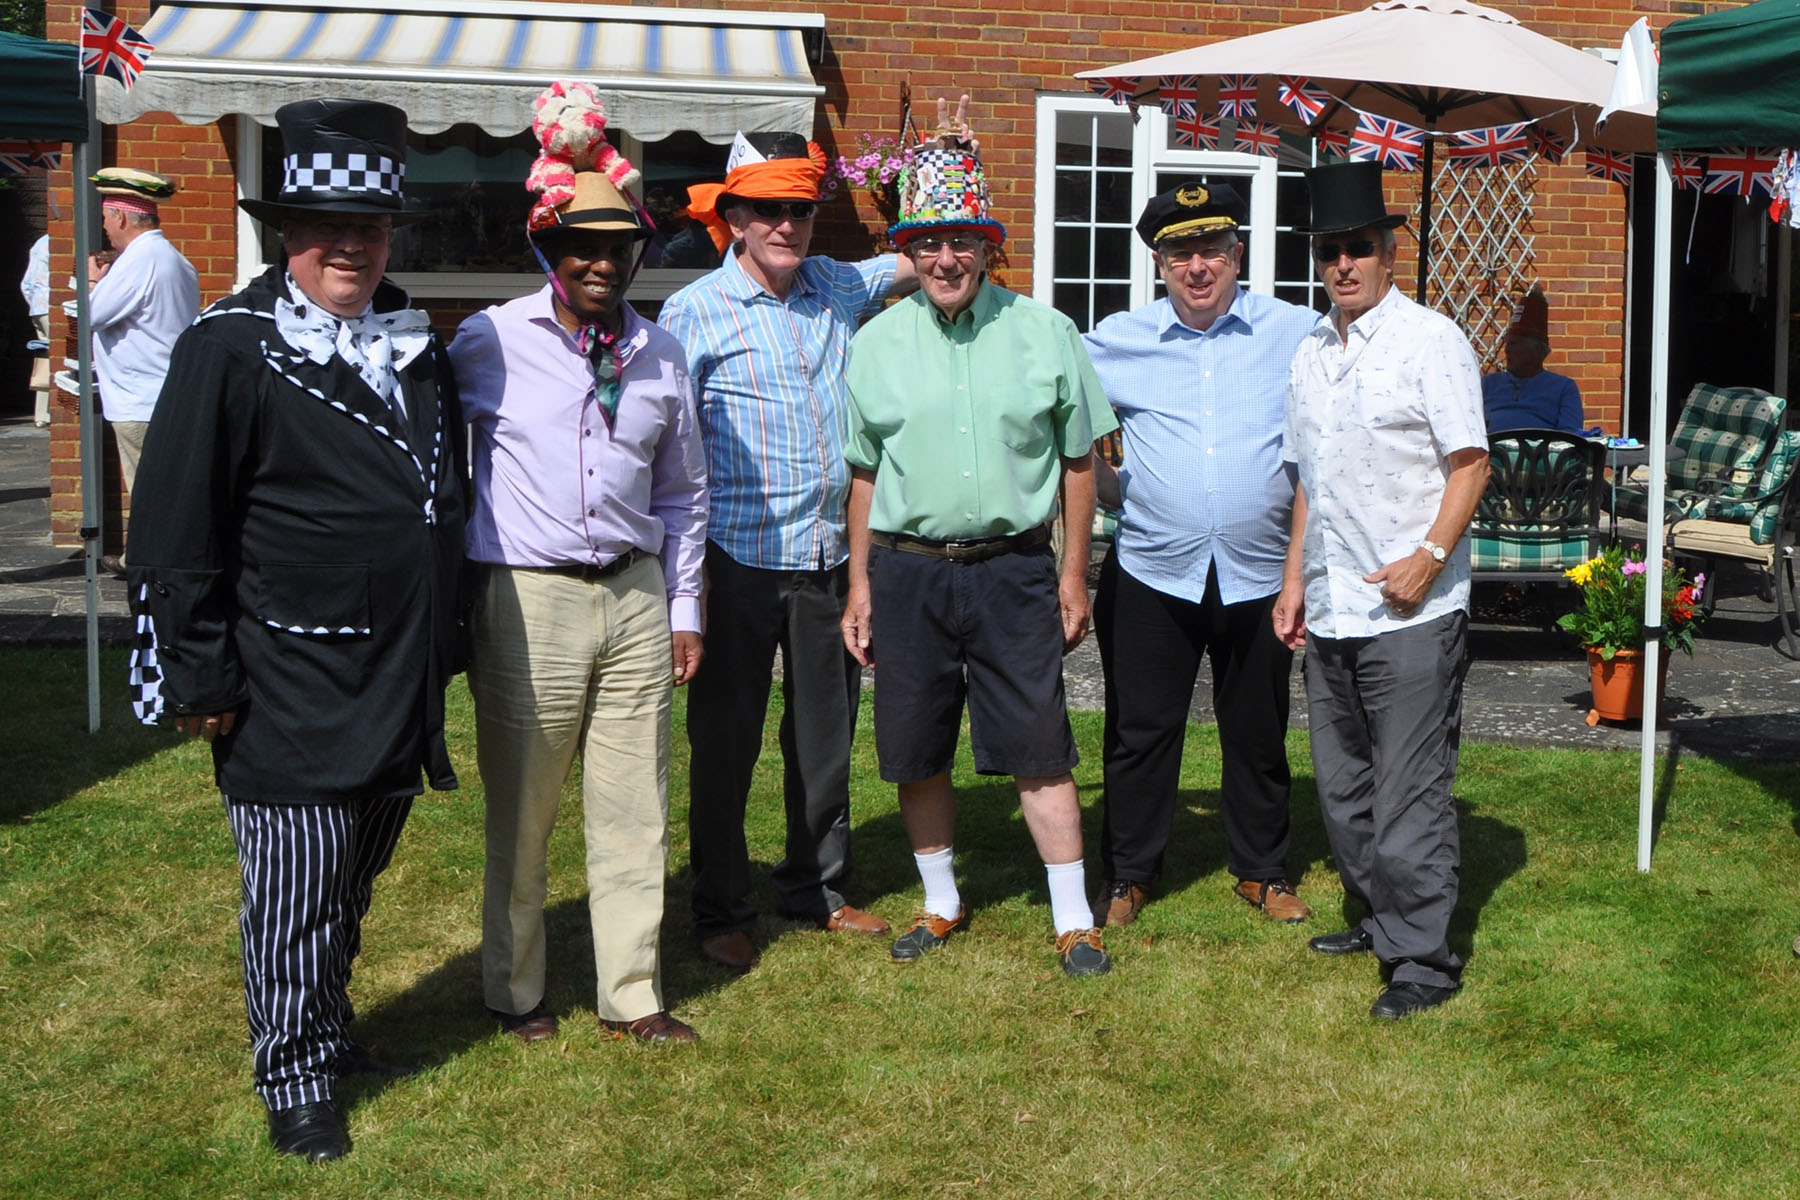 The Provincial Prior’s Mad Hatter’s Tea Party